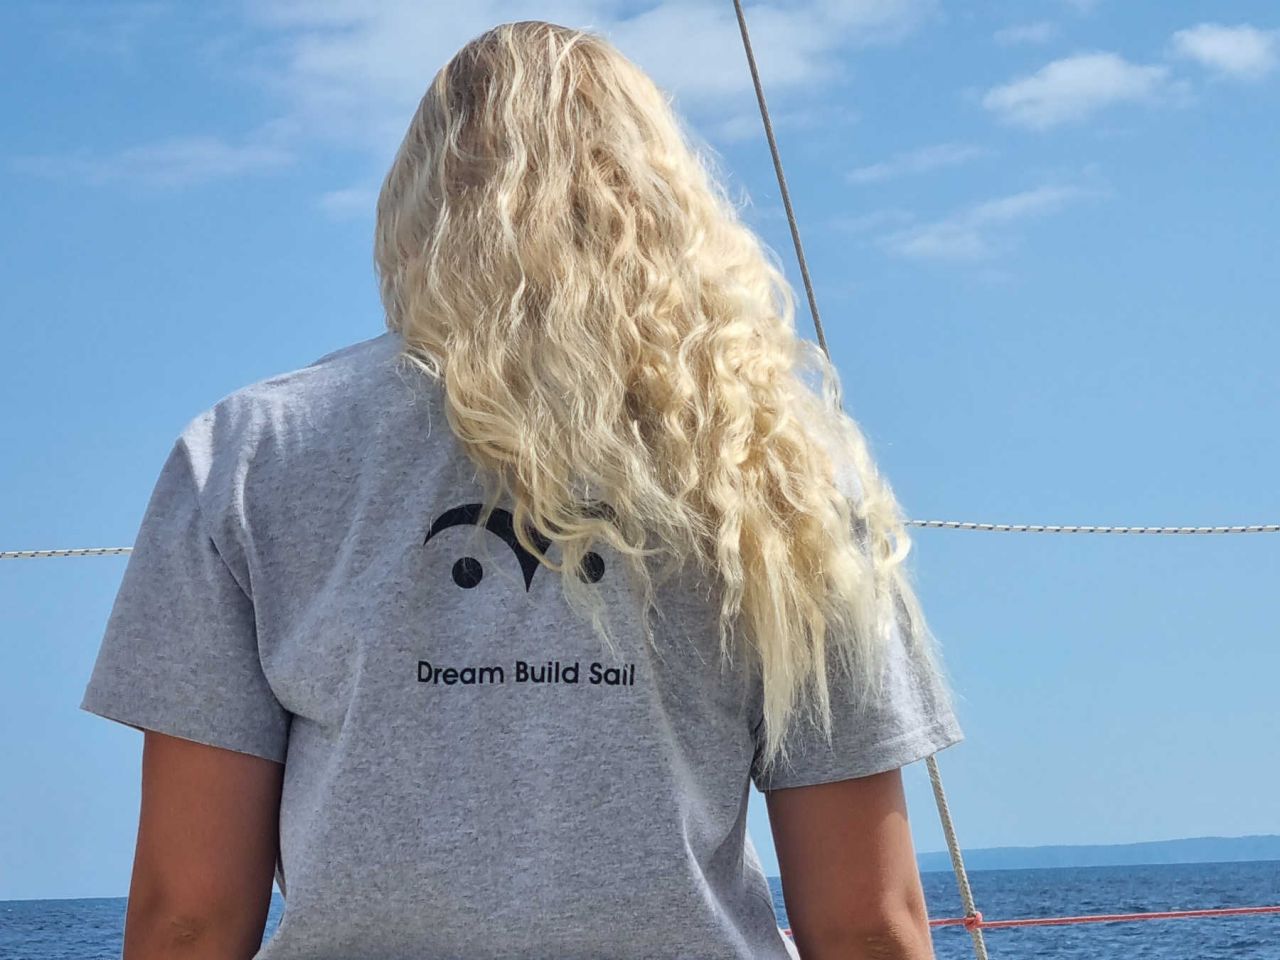 Rear view of woman with blonde hair and grey T-shirt